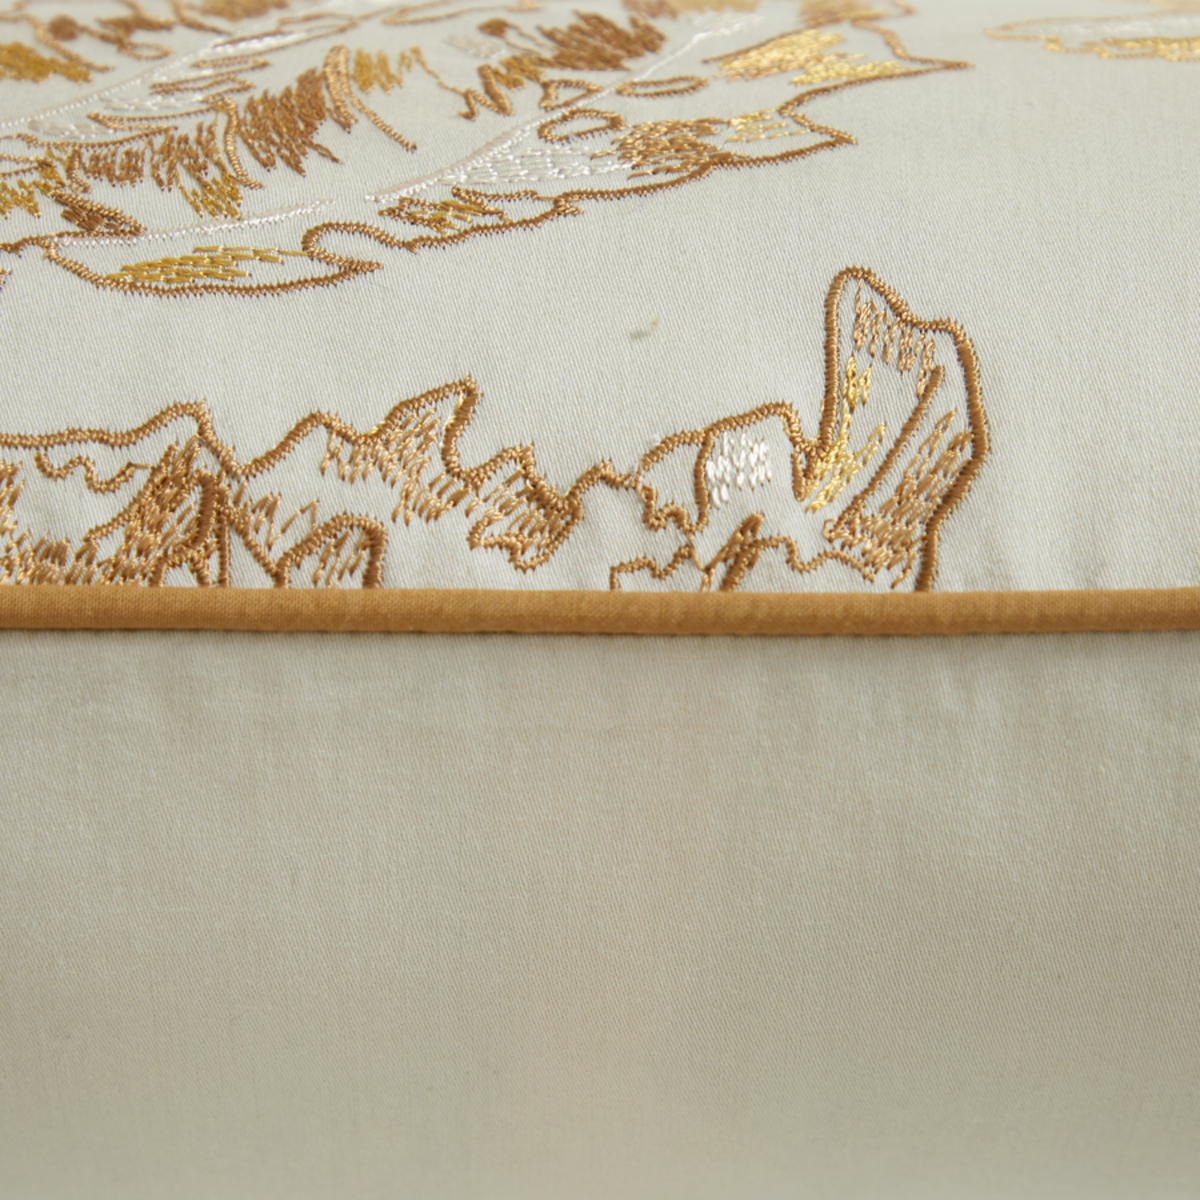 Edge Piping of Yves Delorme Faune Decorative Pillow